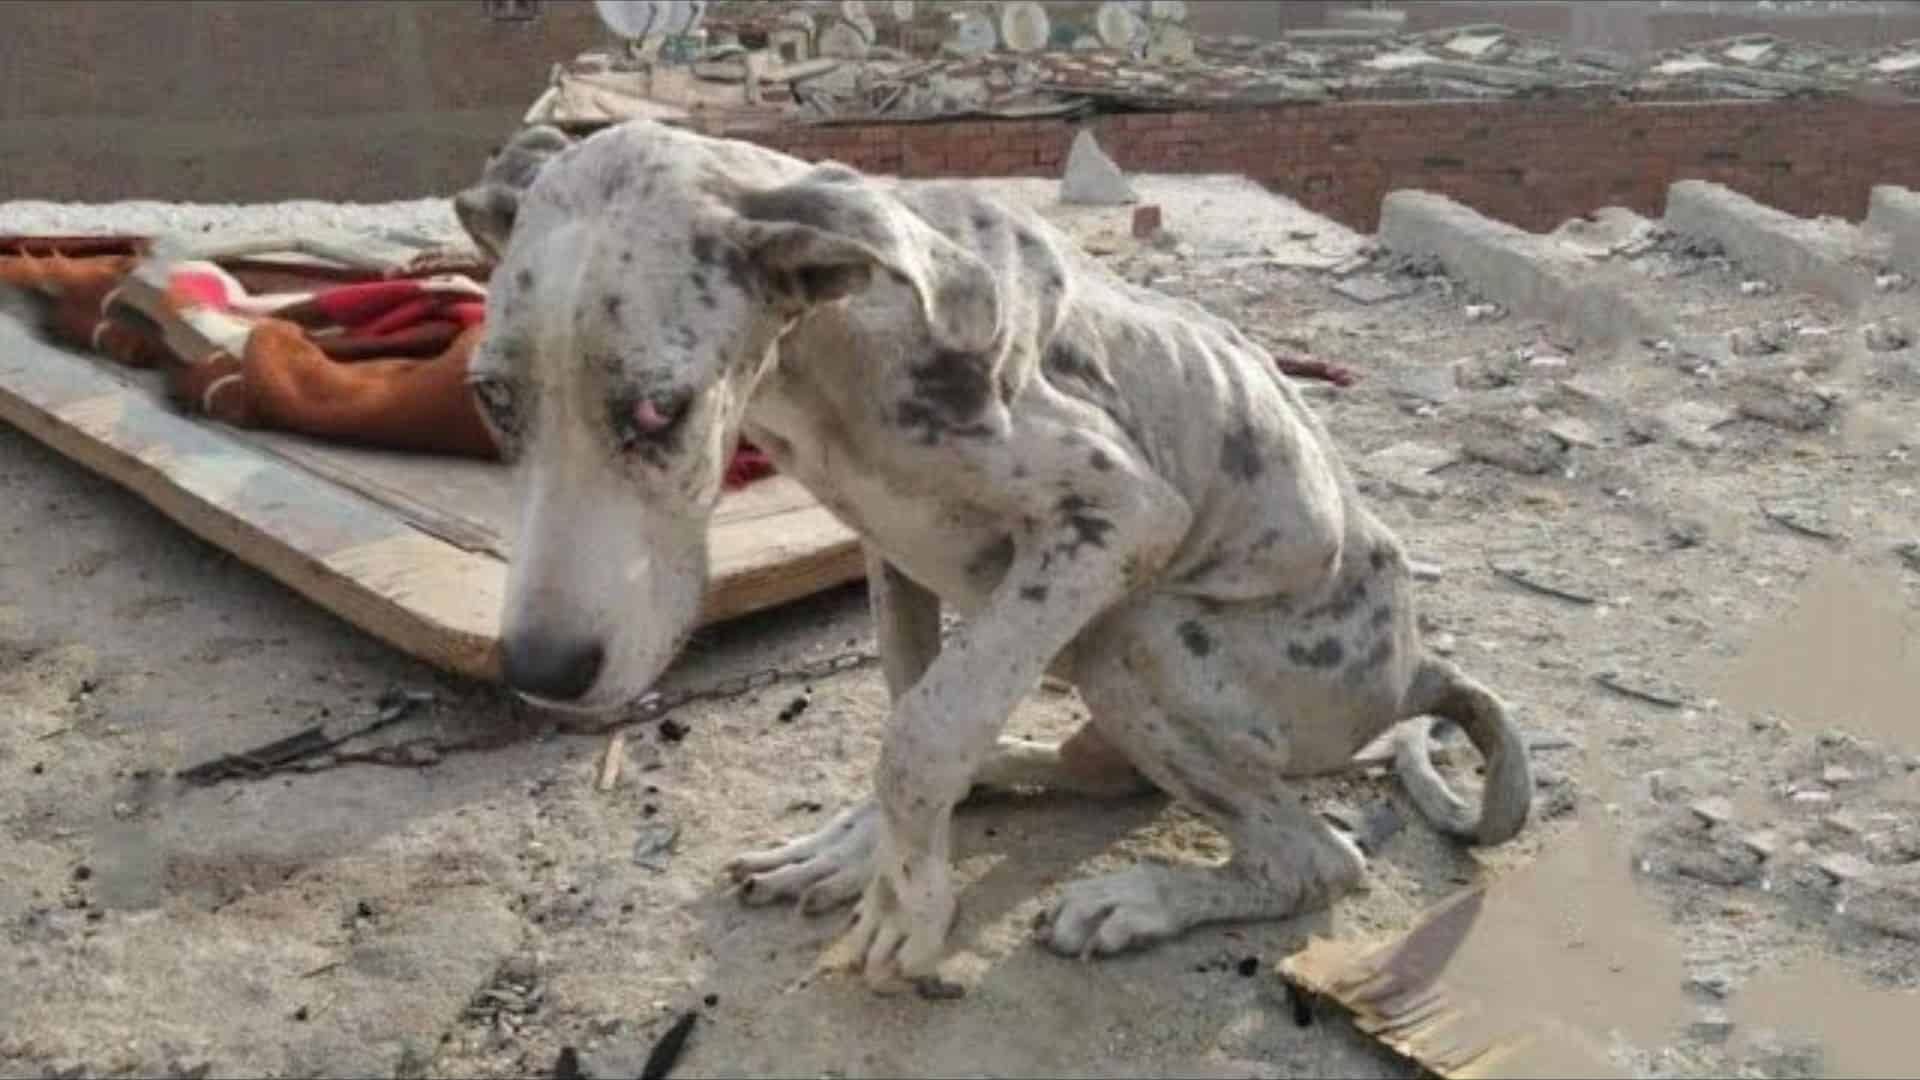 After Eating Rocks To Survive, This Great Dane Finally Gets A Second Chance